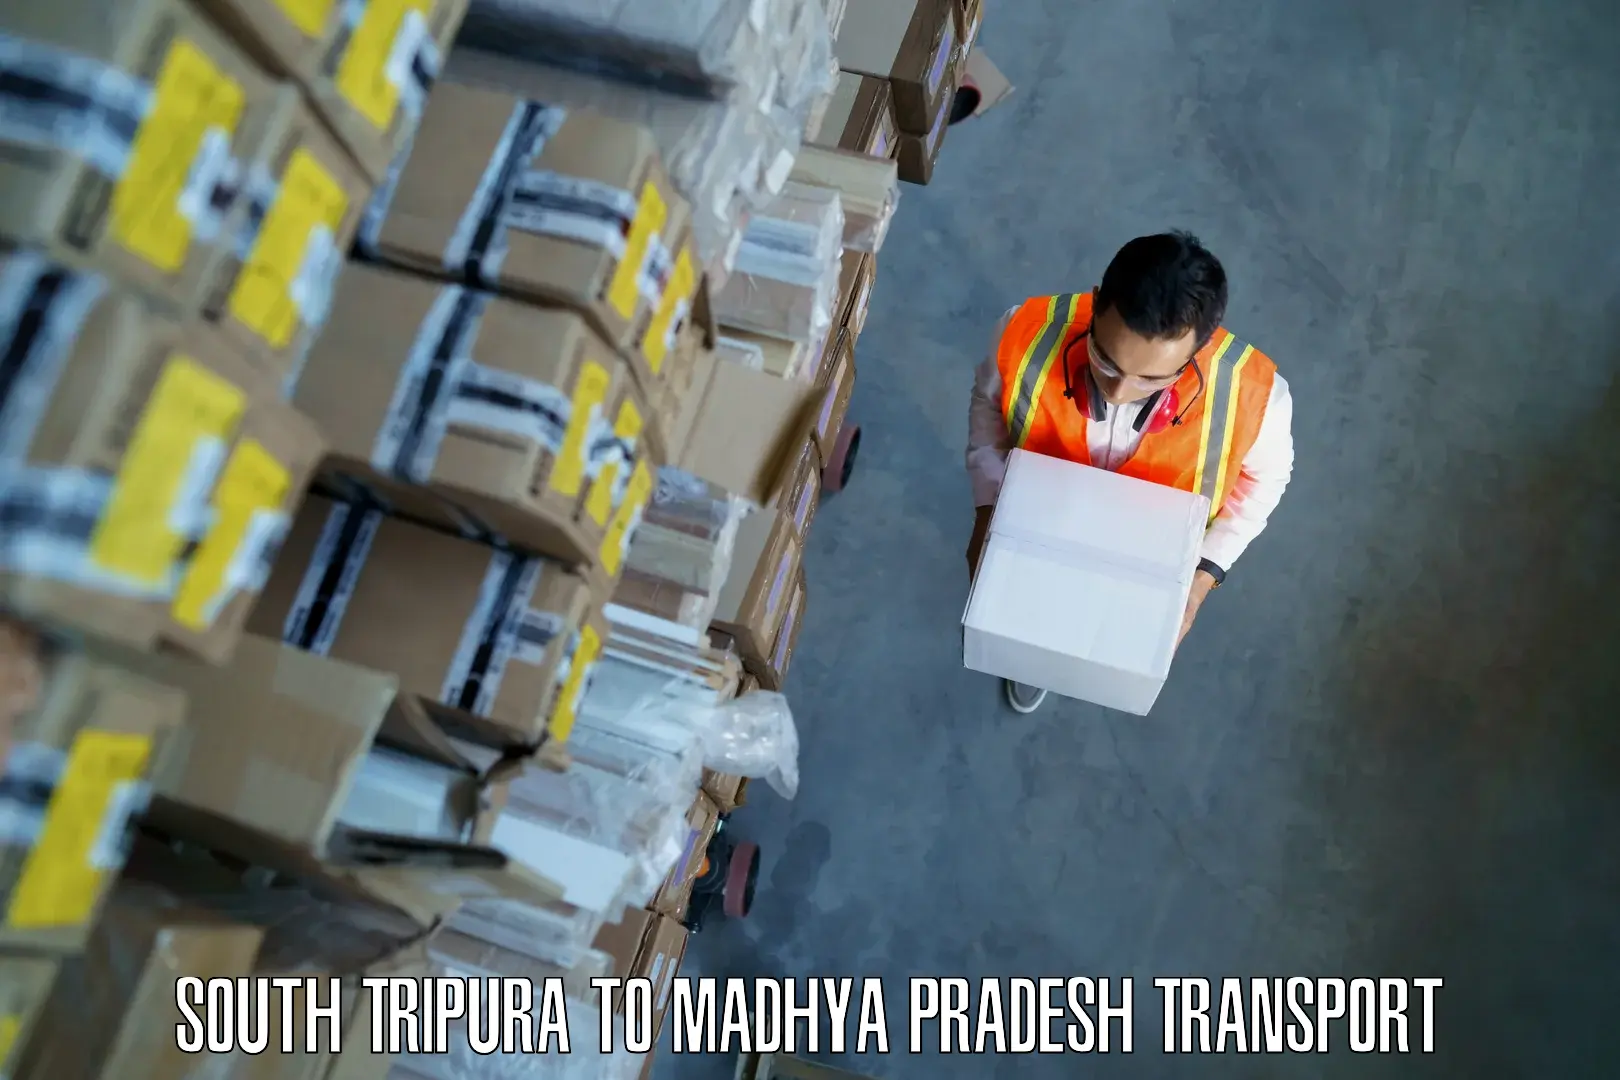 Inland transportation services in South Tripura to Gotegaon